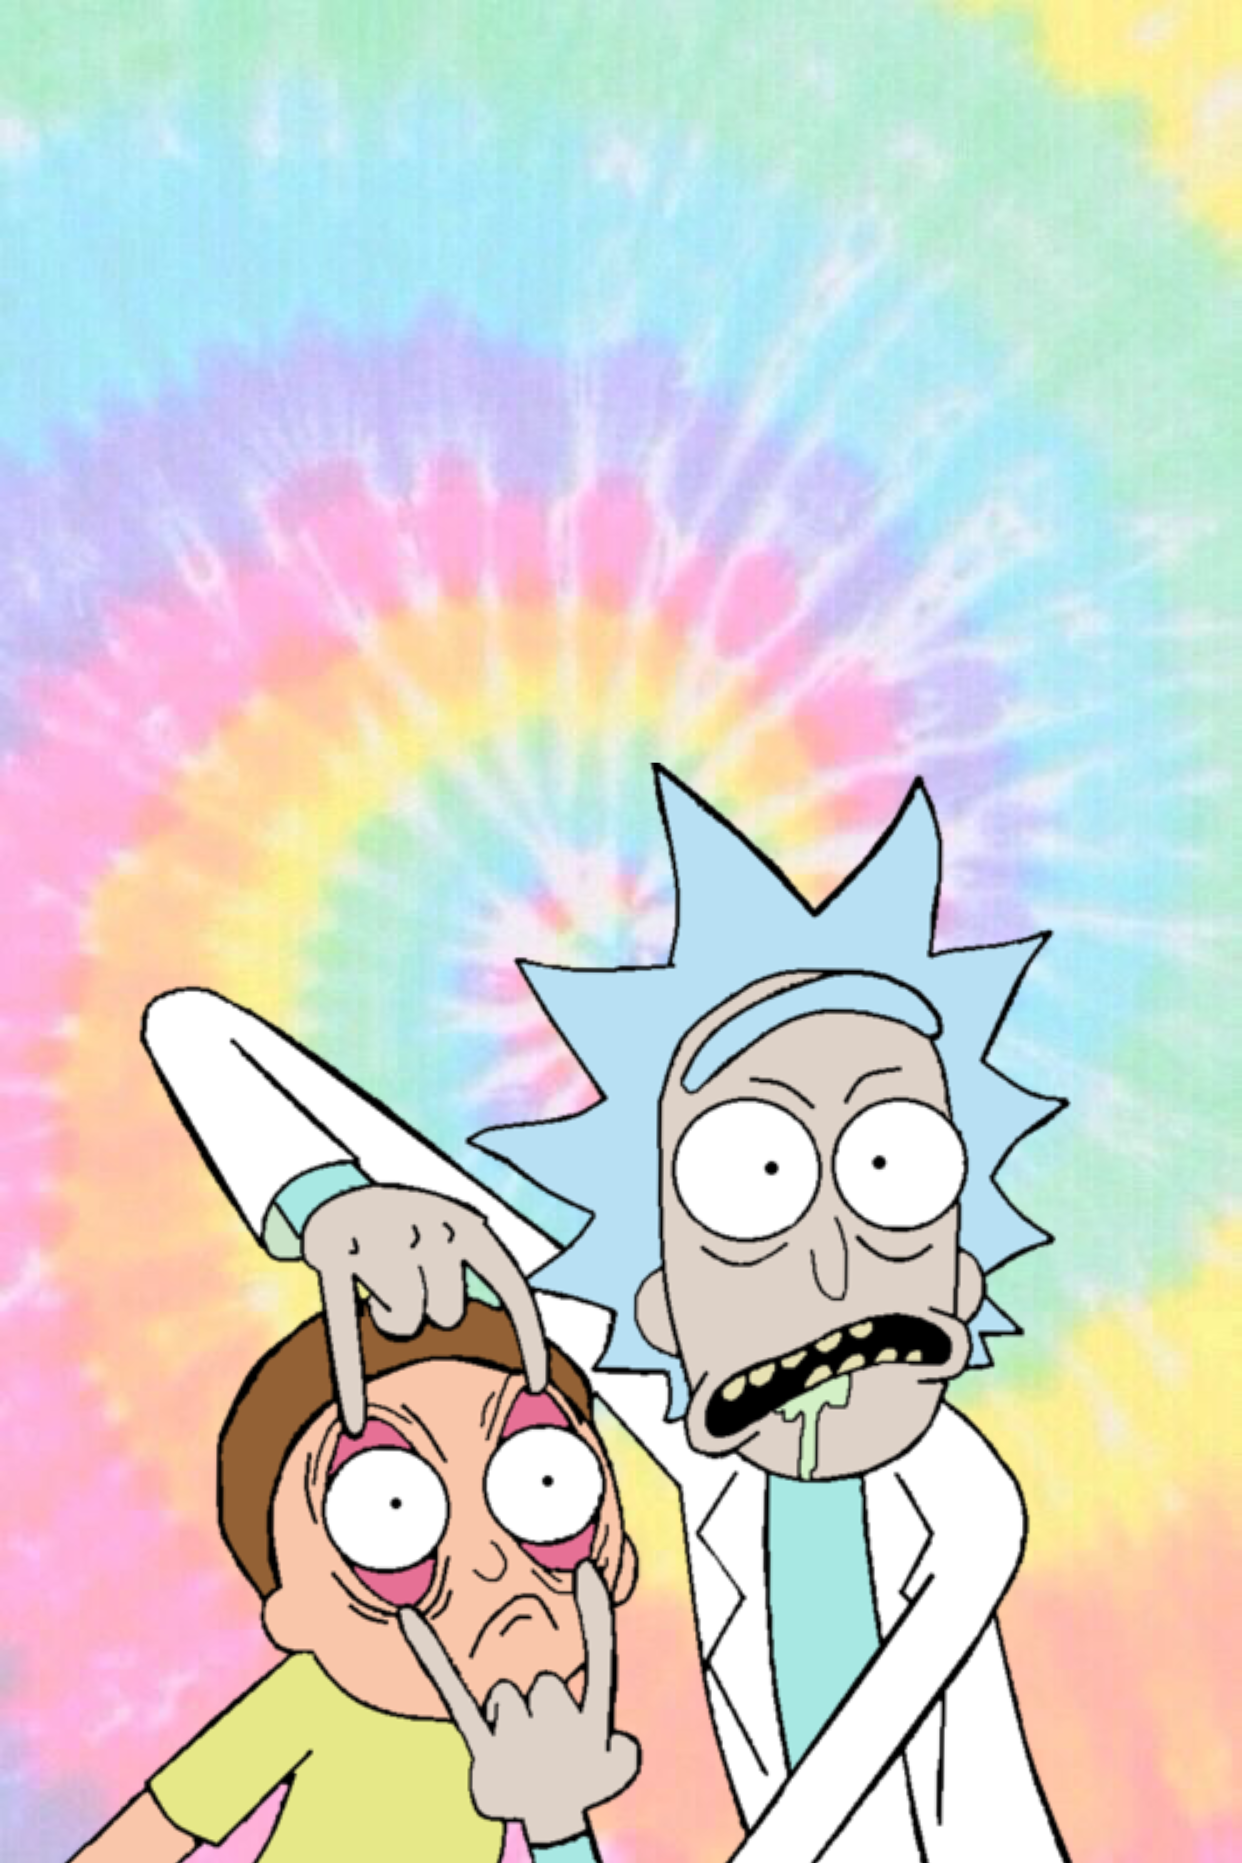 Coolers. Rick and morty poster, Rick